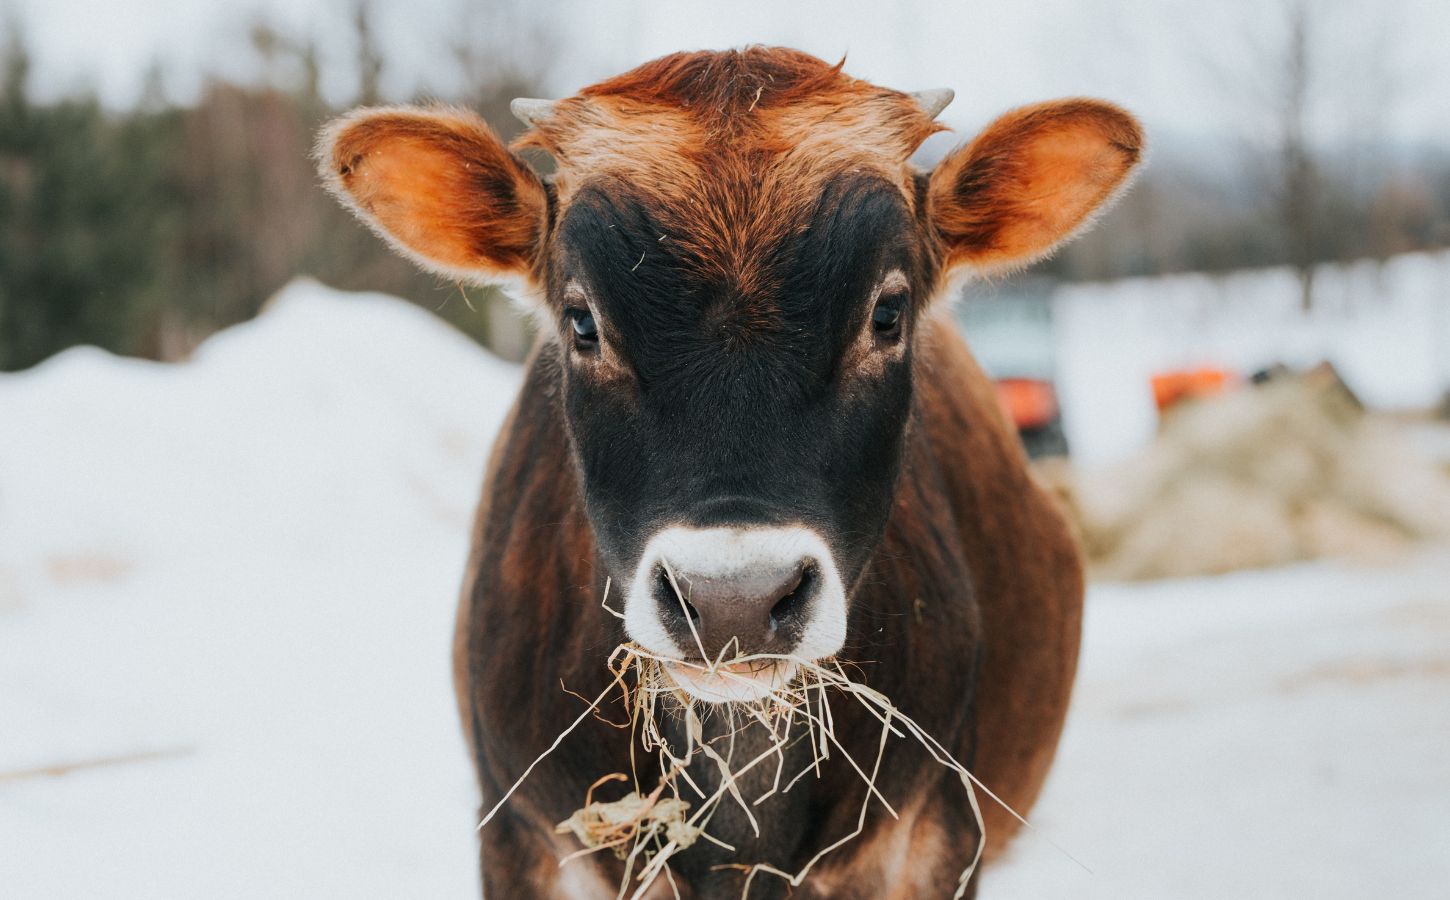 A cow at an animal sanctuary in the cold